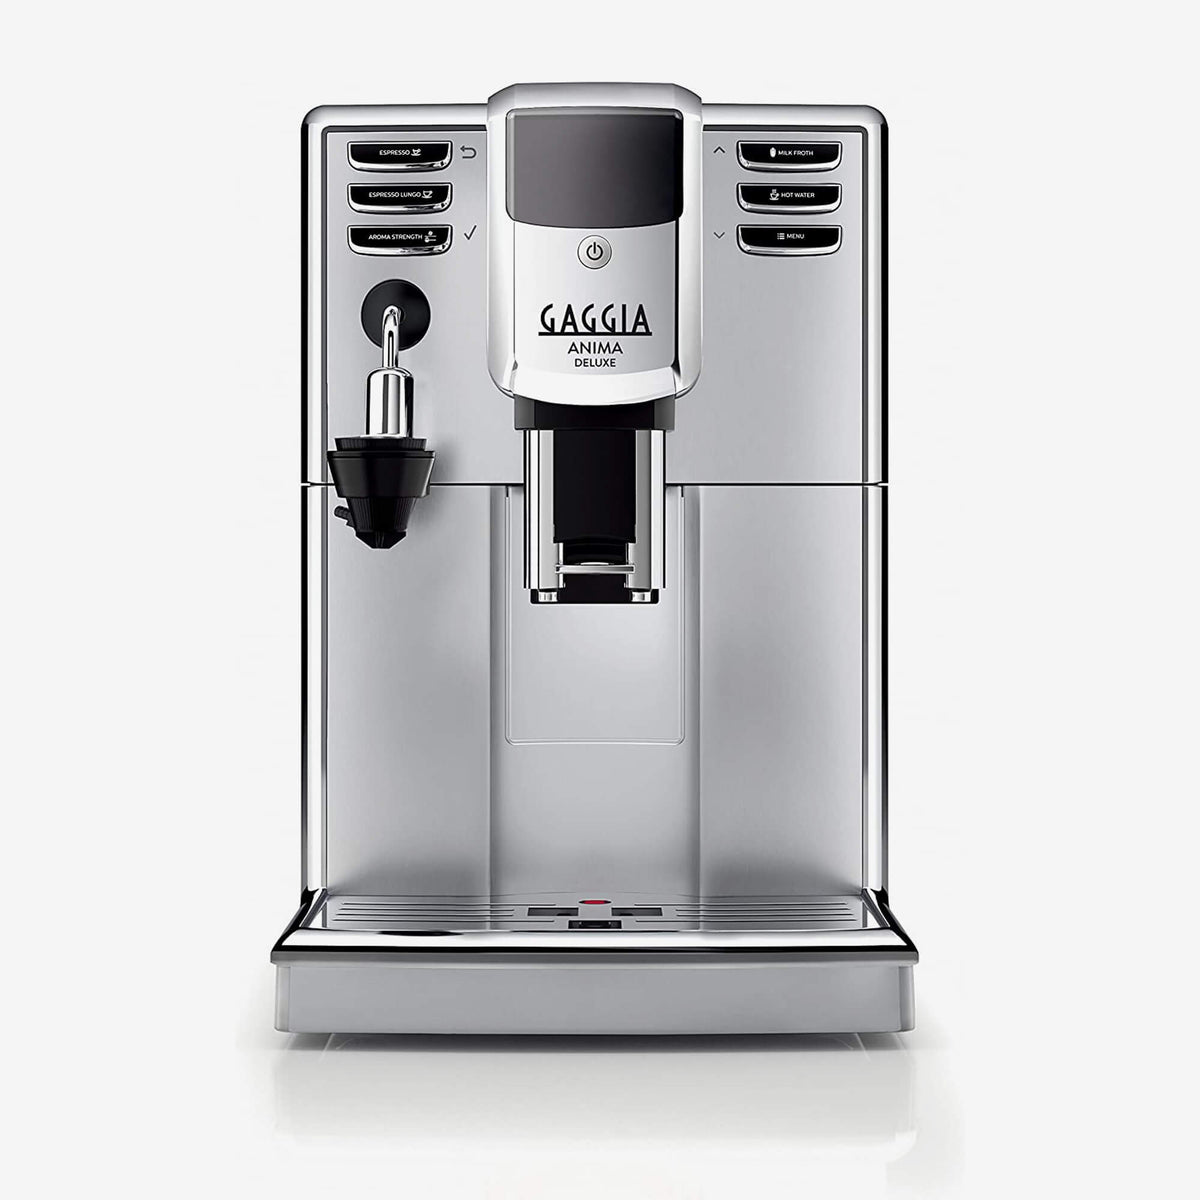 Anima Deluxe Bean to Cup Coffee Machine